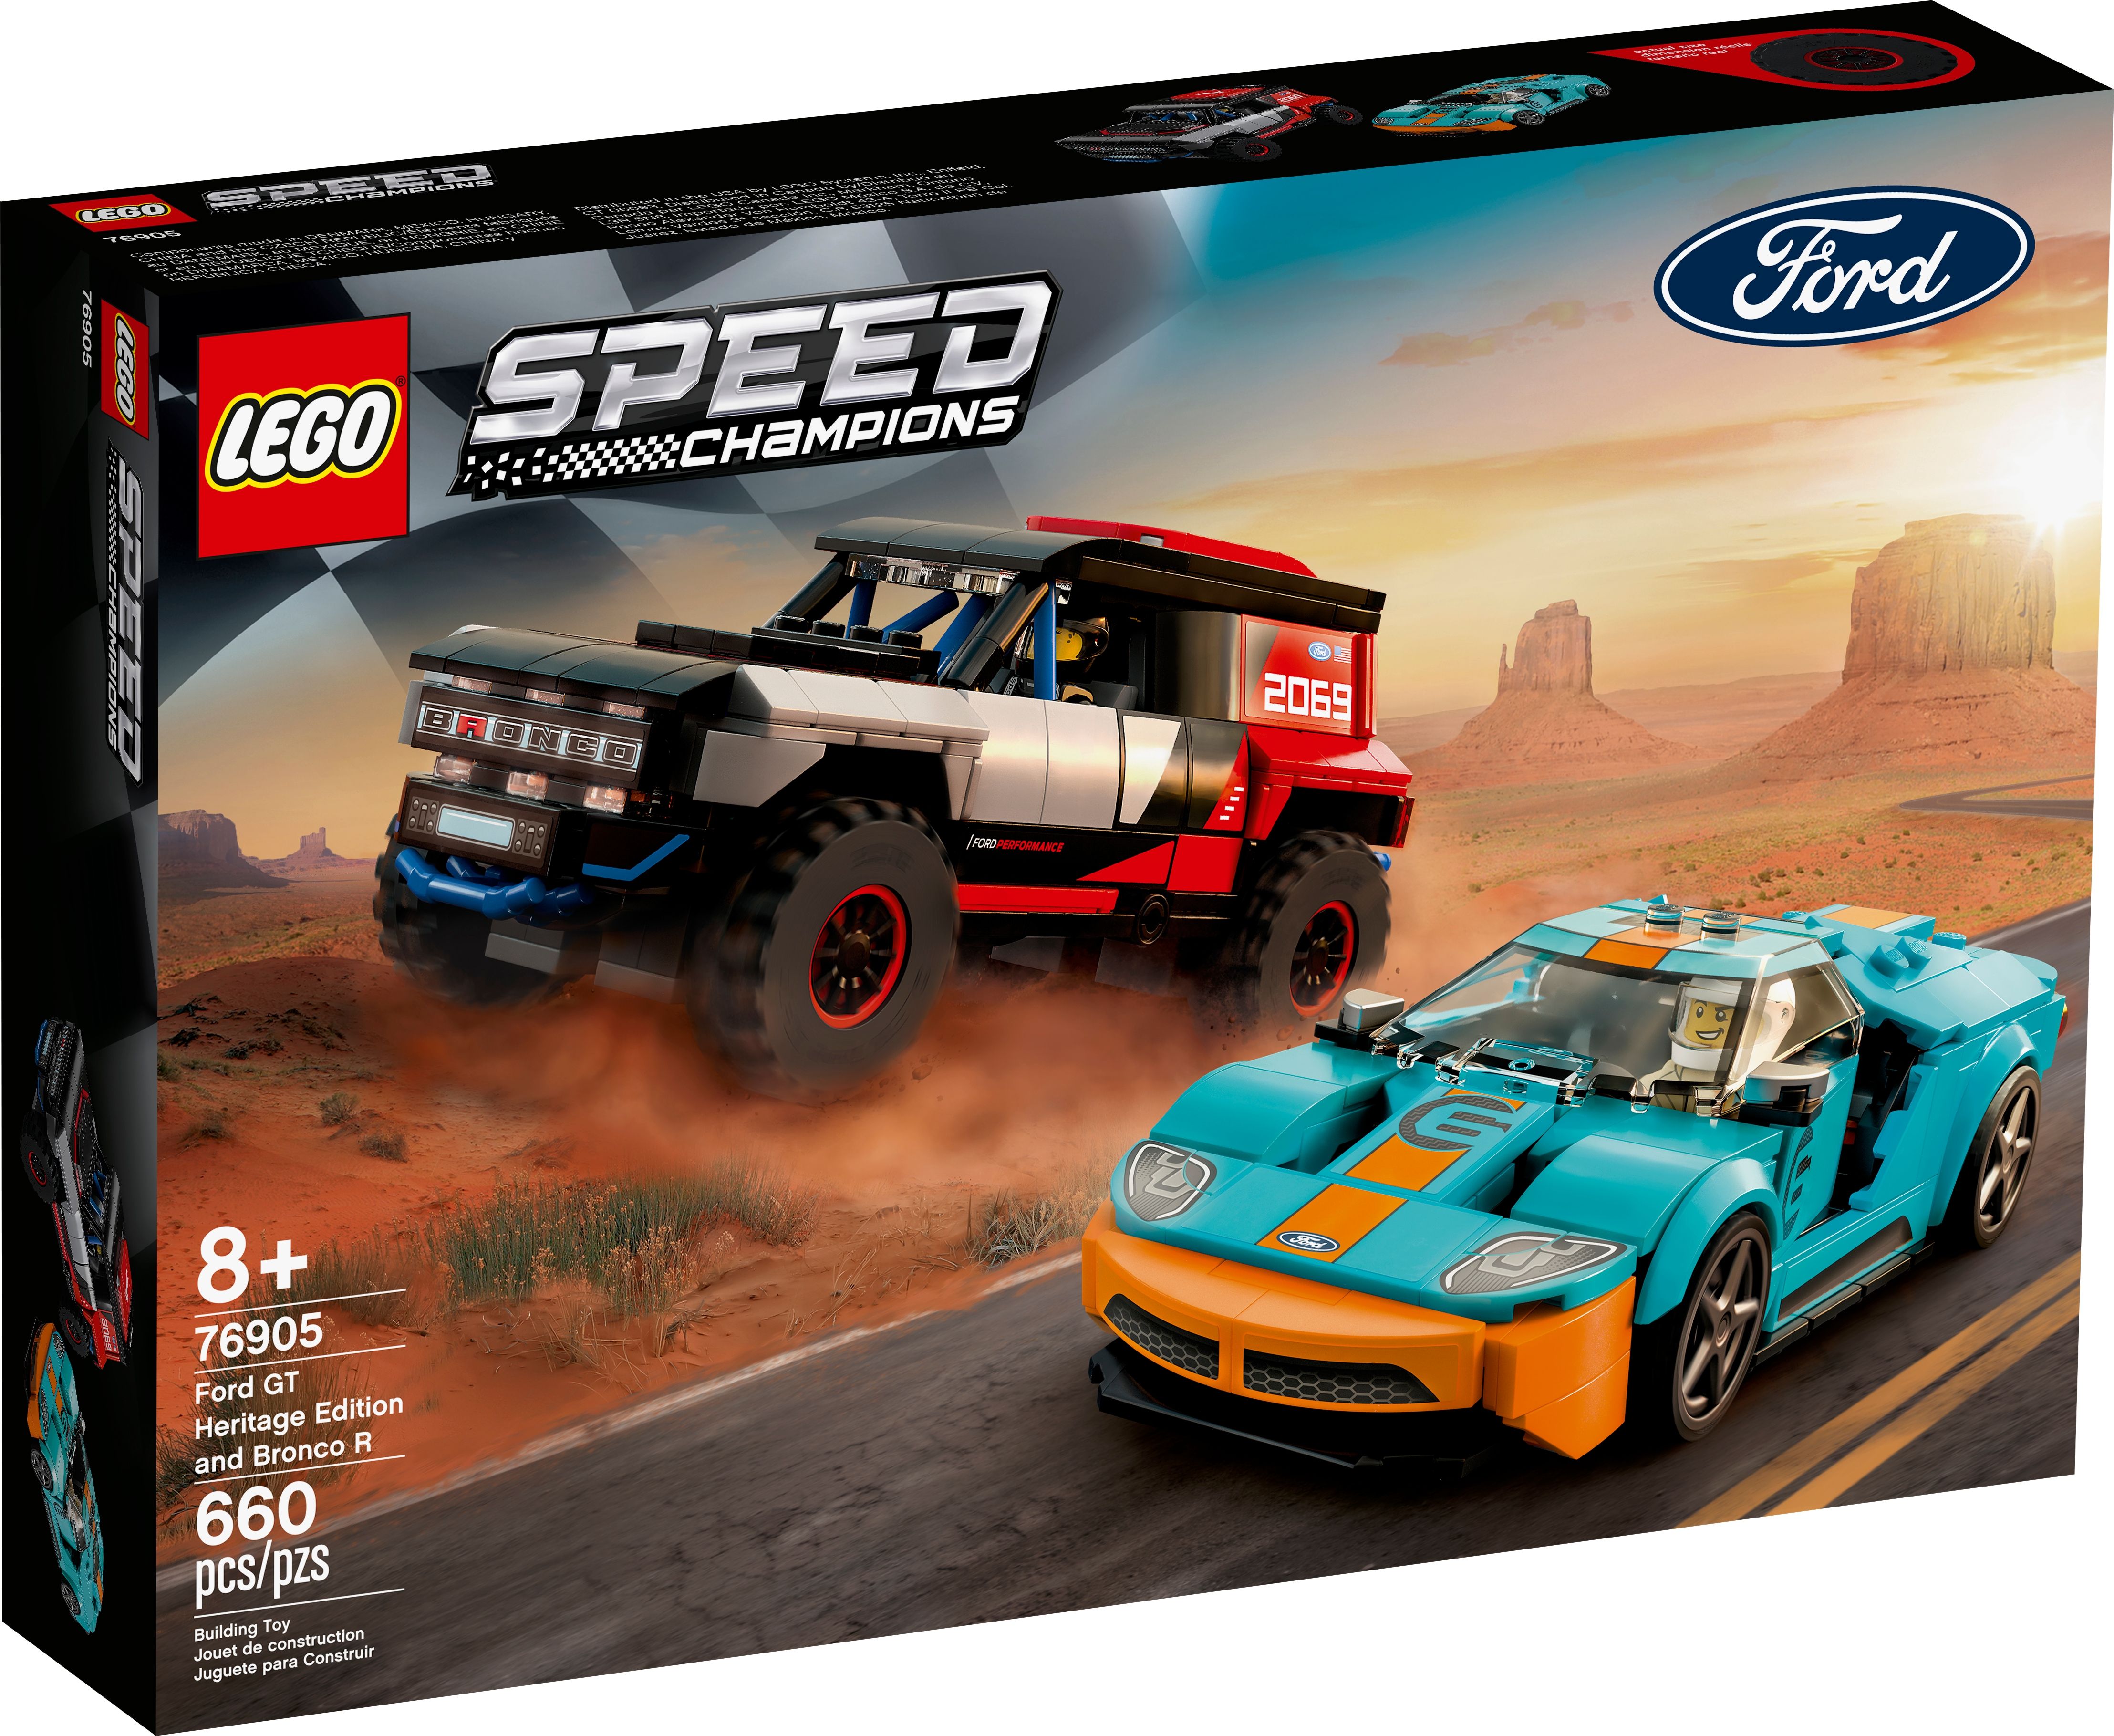 Lego speed champions ford gt